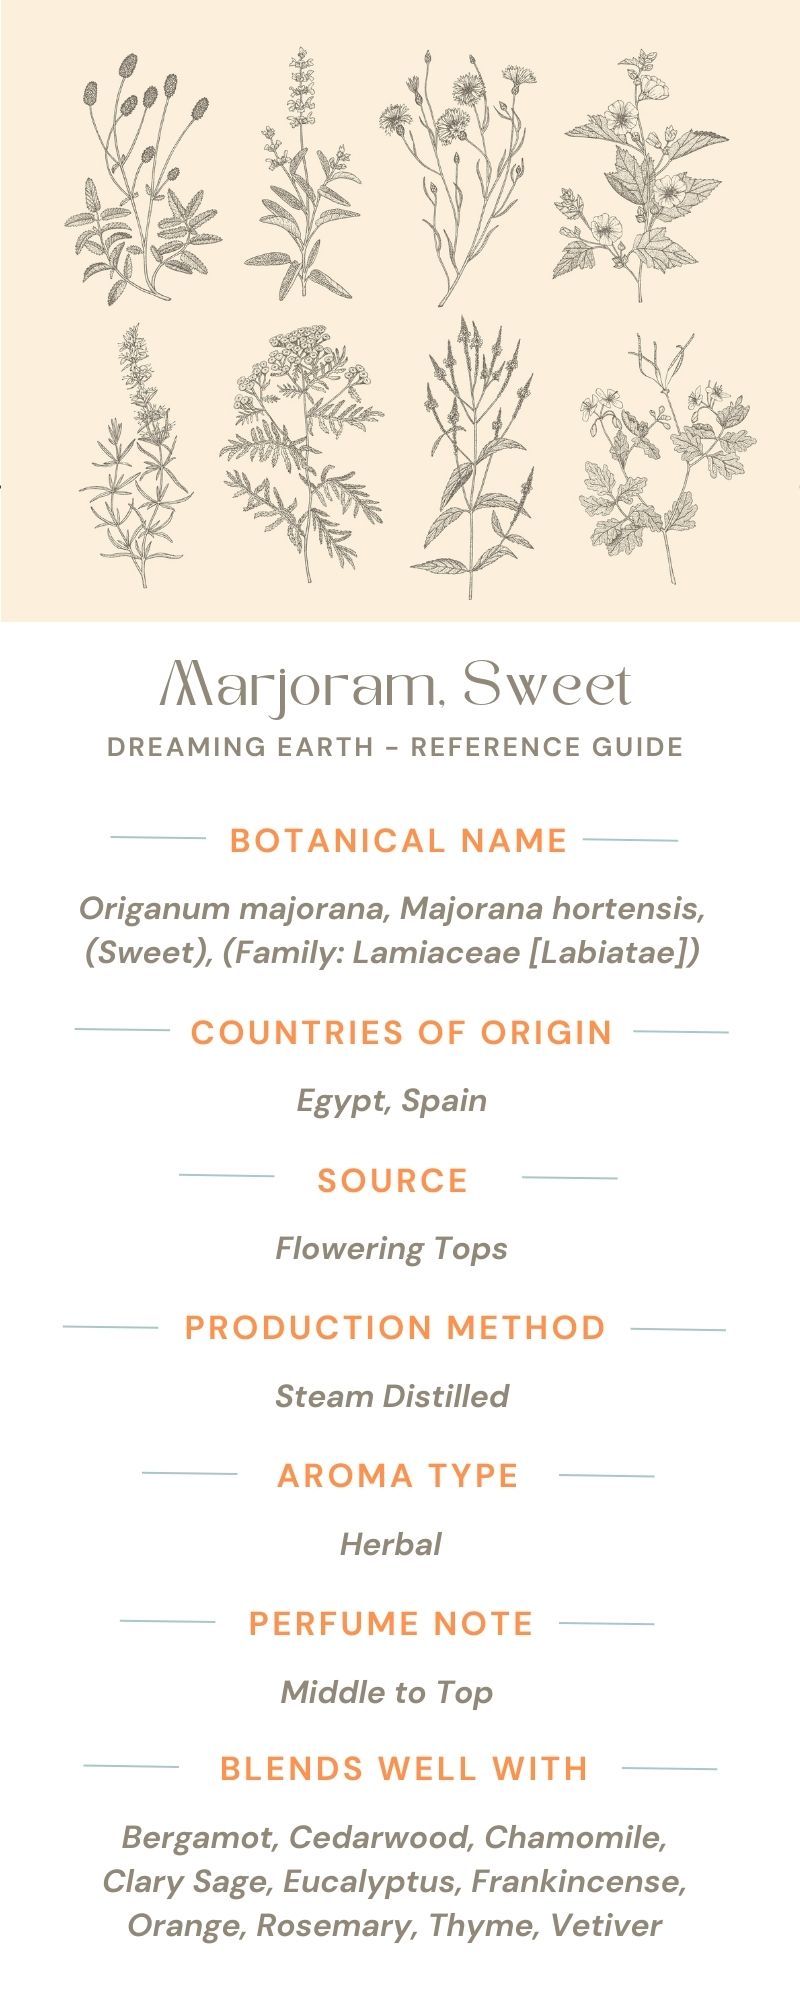 Load image into Gallery viewer, Marjoram, Sweet Essential Oil - Dreaming Earth Inc
